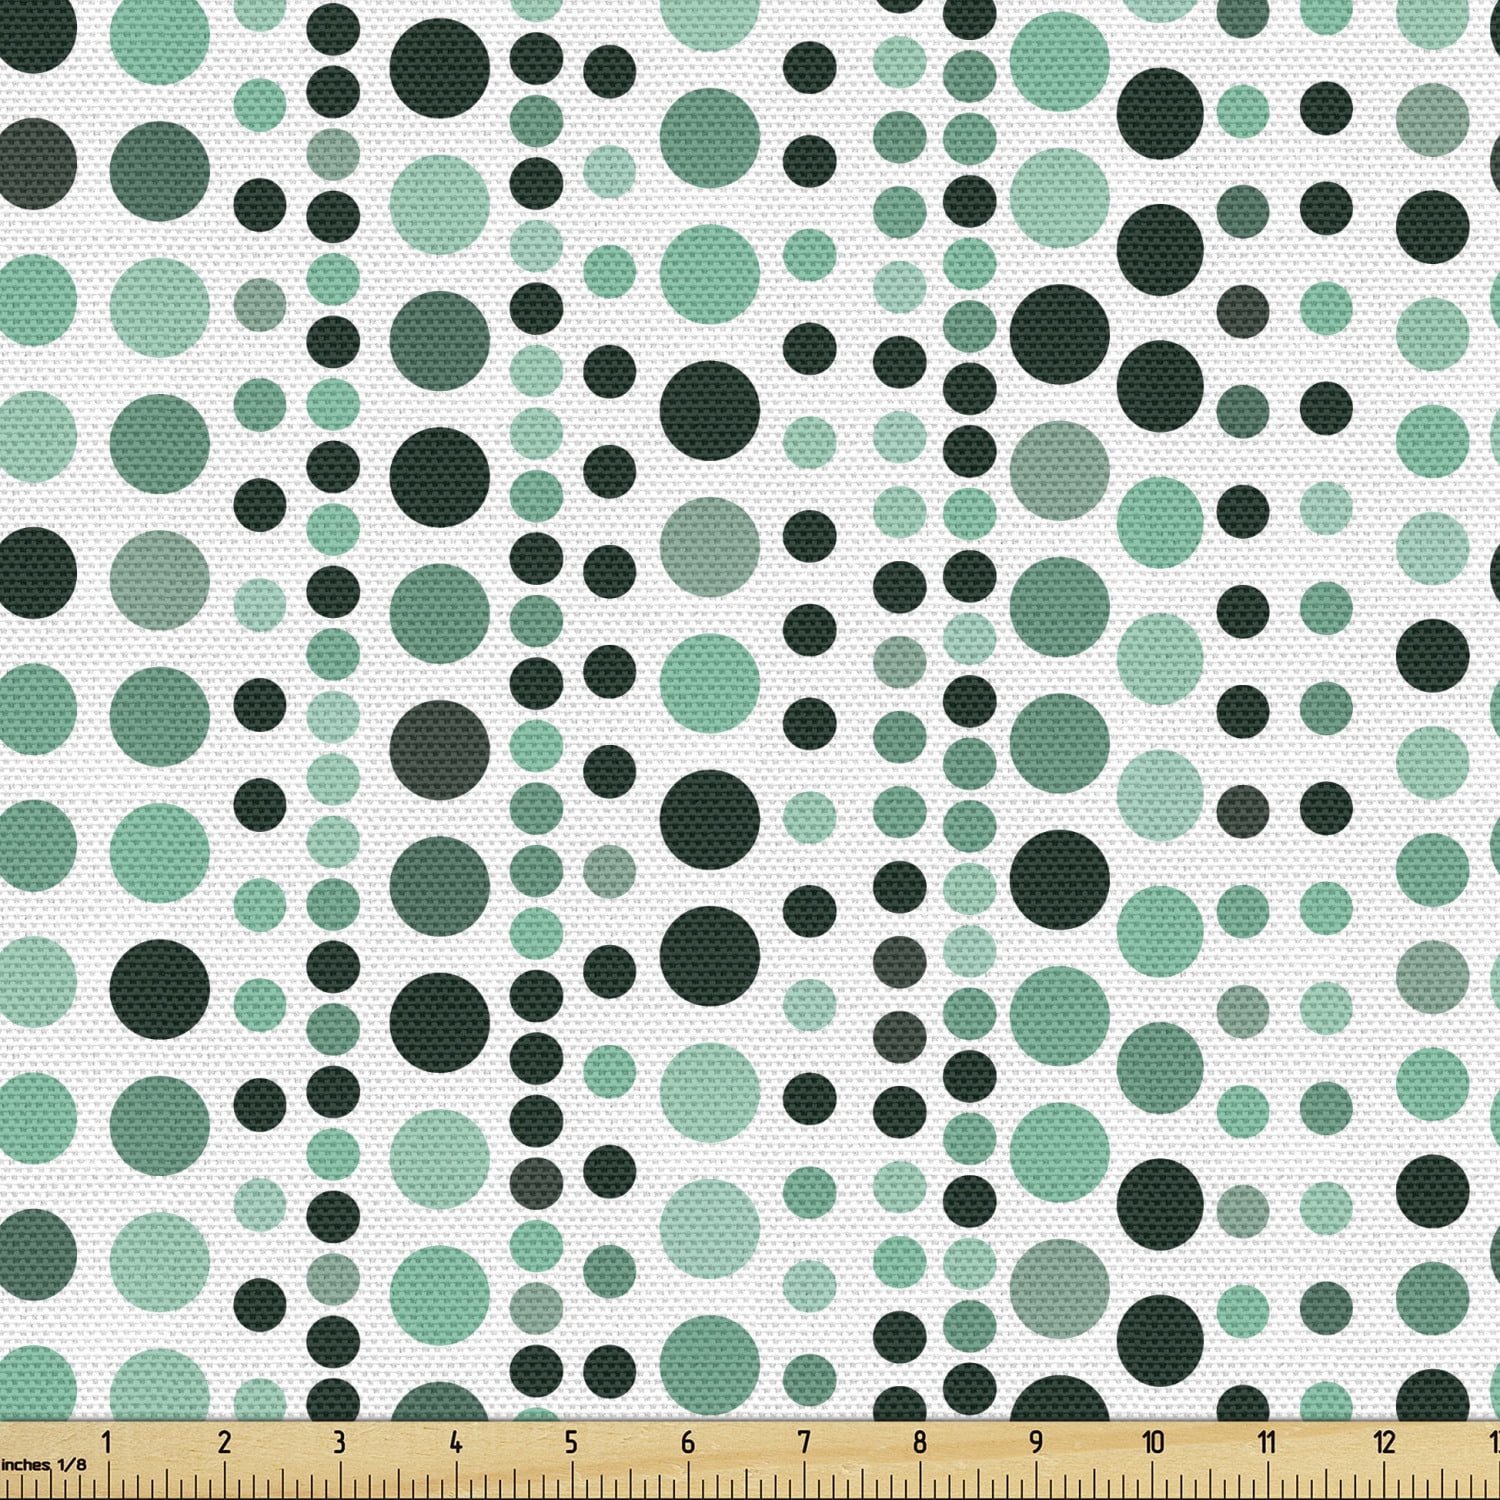 Blue gray and green background with white dots and circles Batik Fabric by  the Yard